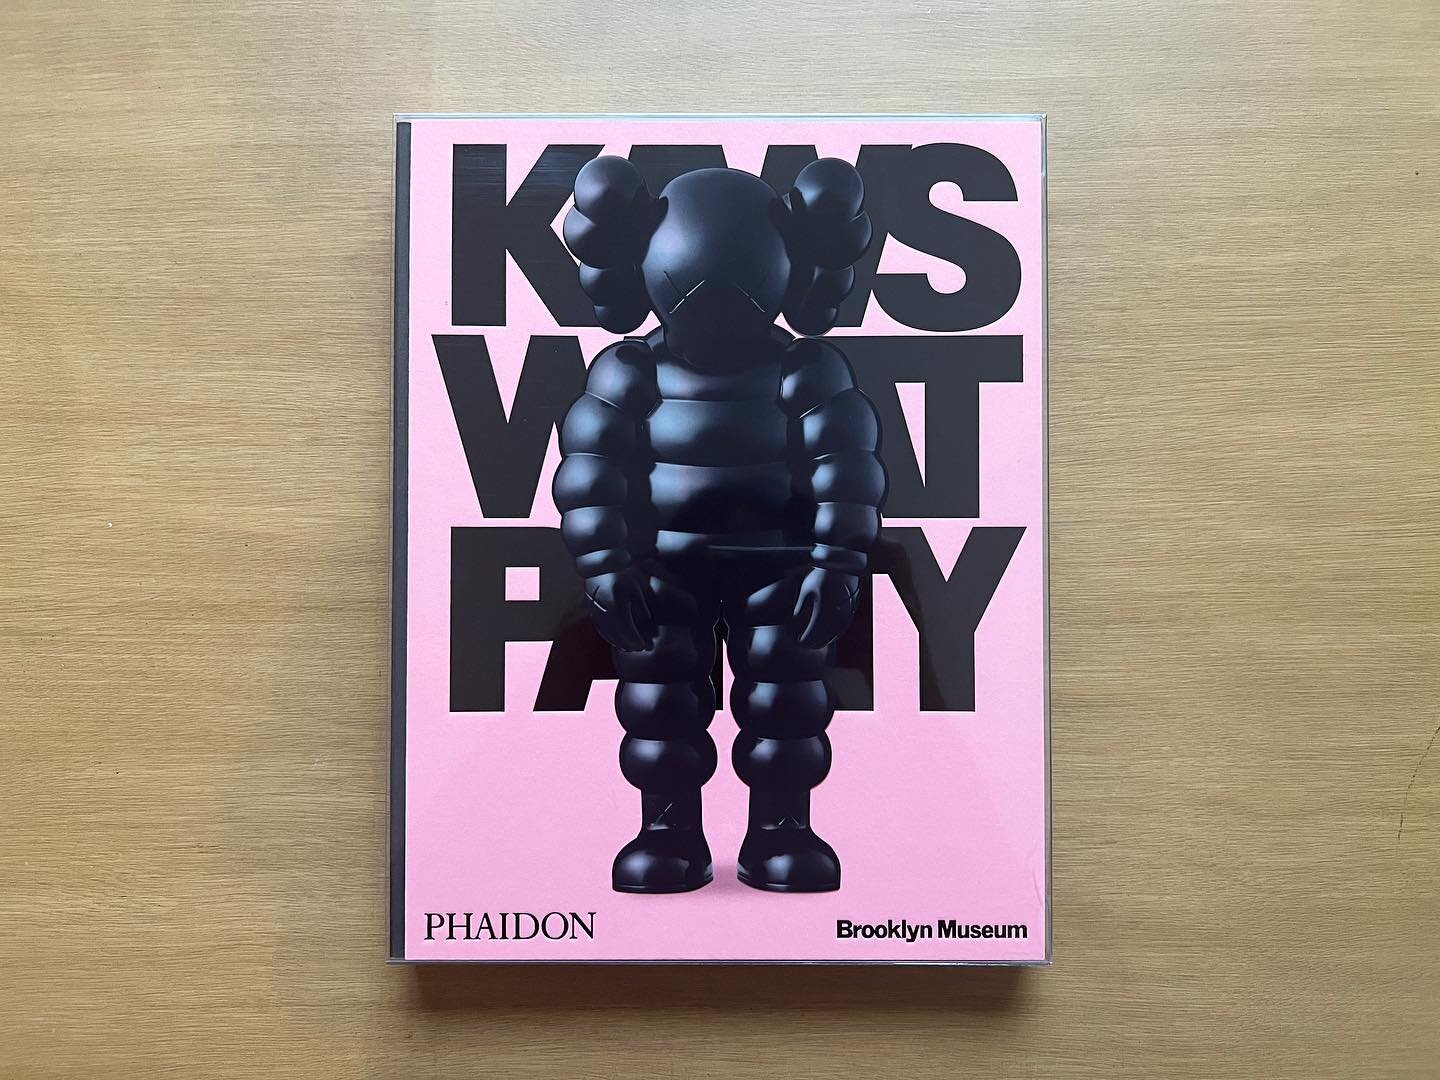 KAWS WHAT PARTY

A comprehensive monograph on the work of KAWS, one of the most sought-after artists and creative forces of our time

Drawing from Pop art traditions, KAWS&rsquo;s work straddles the line between fine art and popular culture, crossing